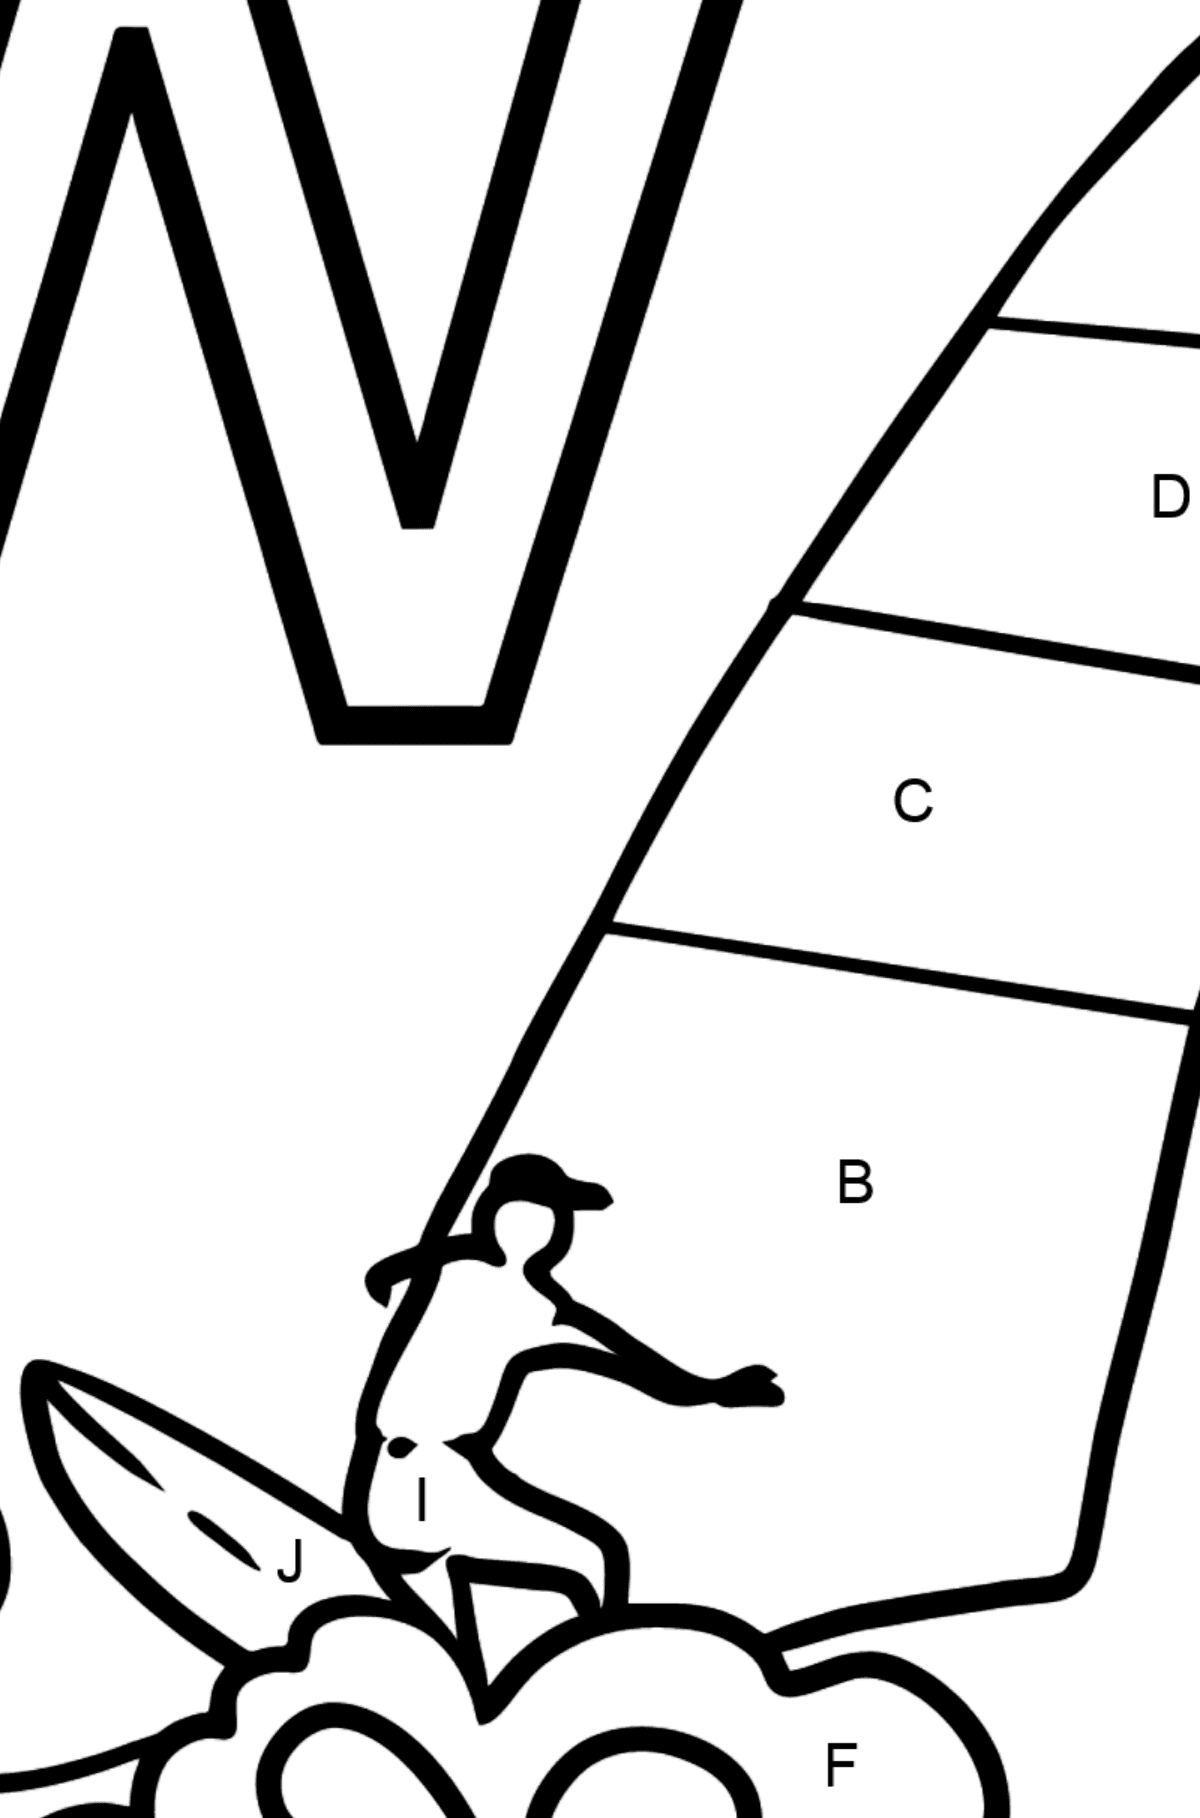 Spanish Letter W coloring pages - WINDSURF - Coloring by Letters for Kids